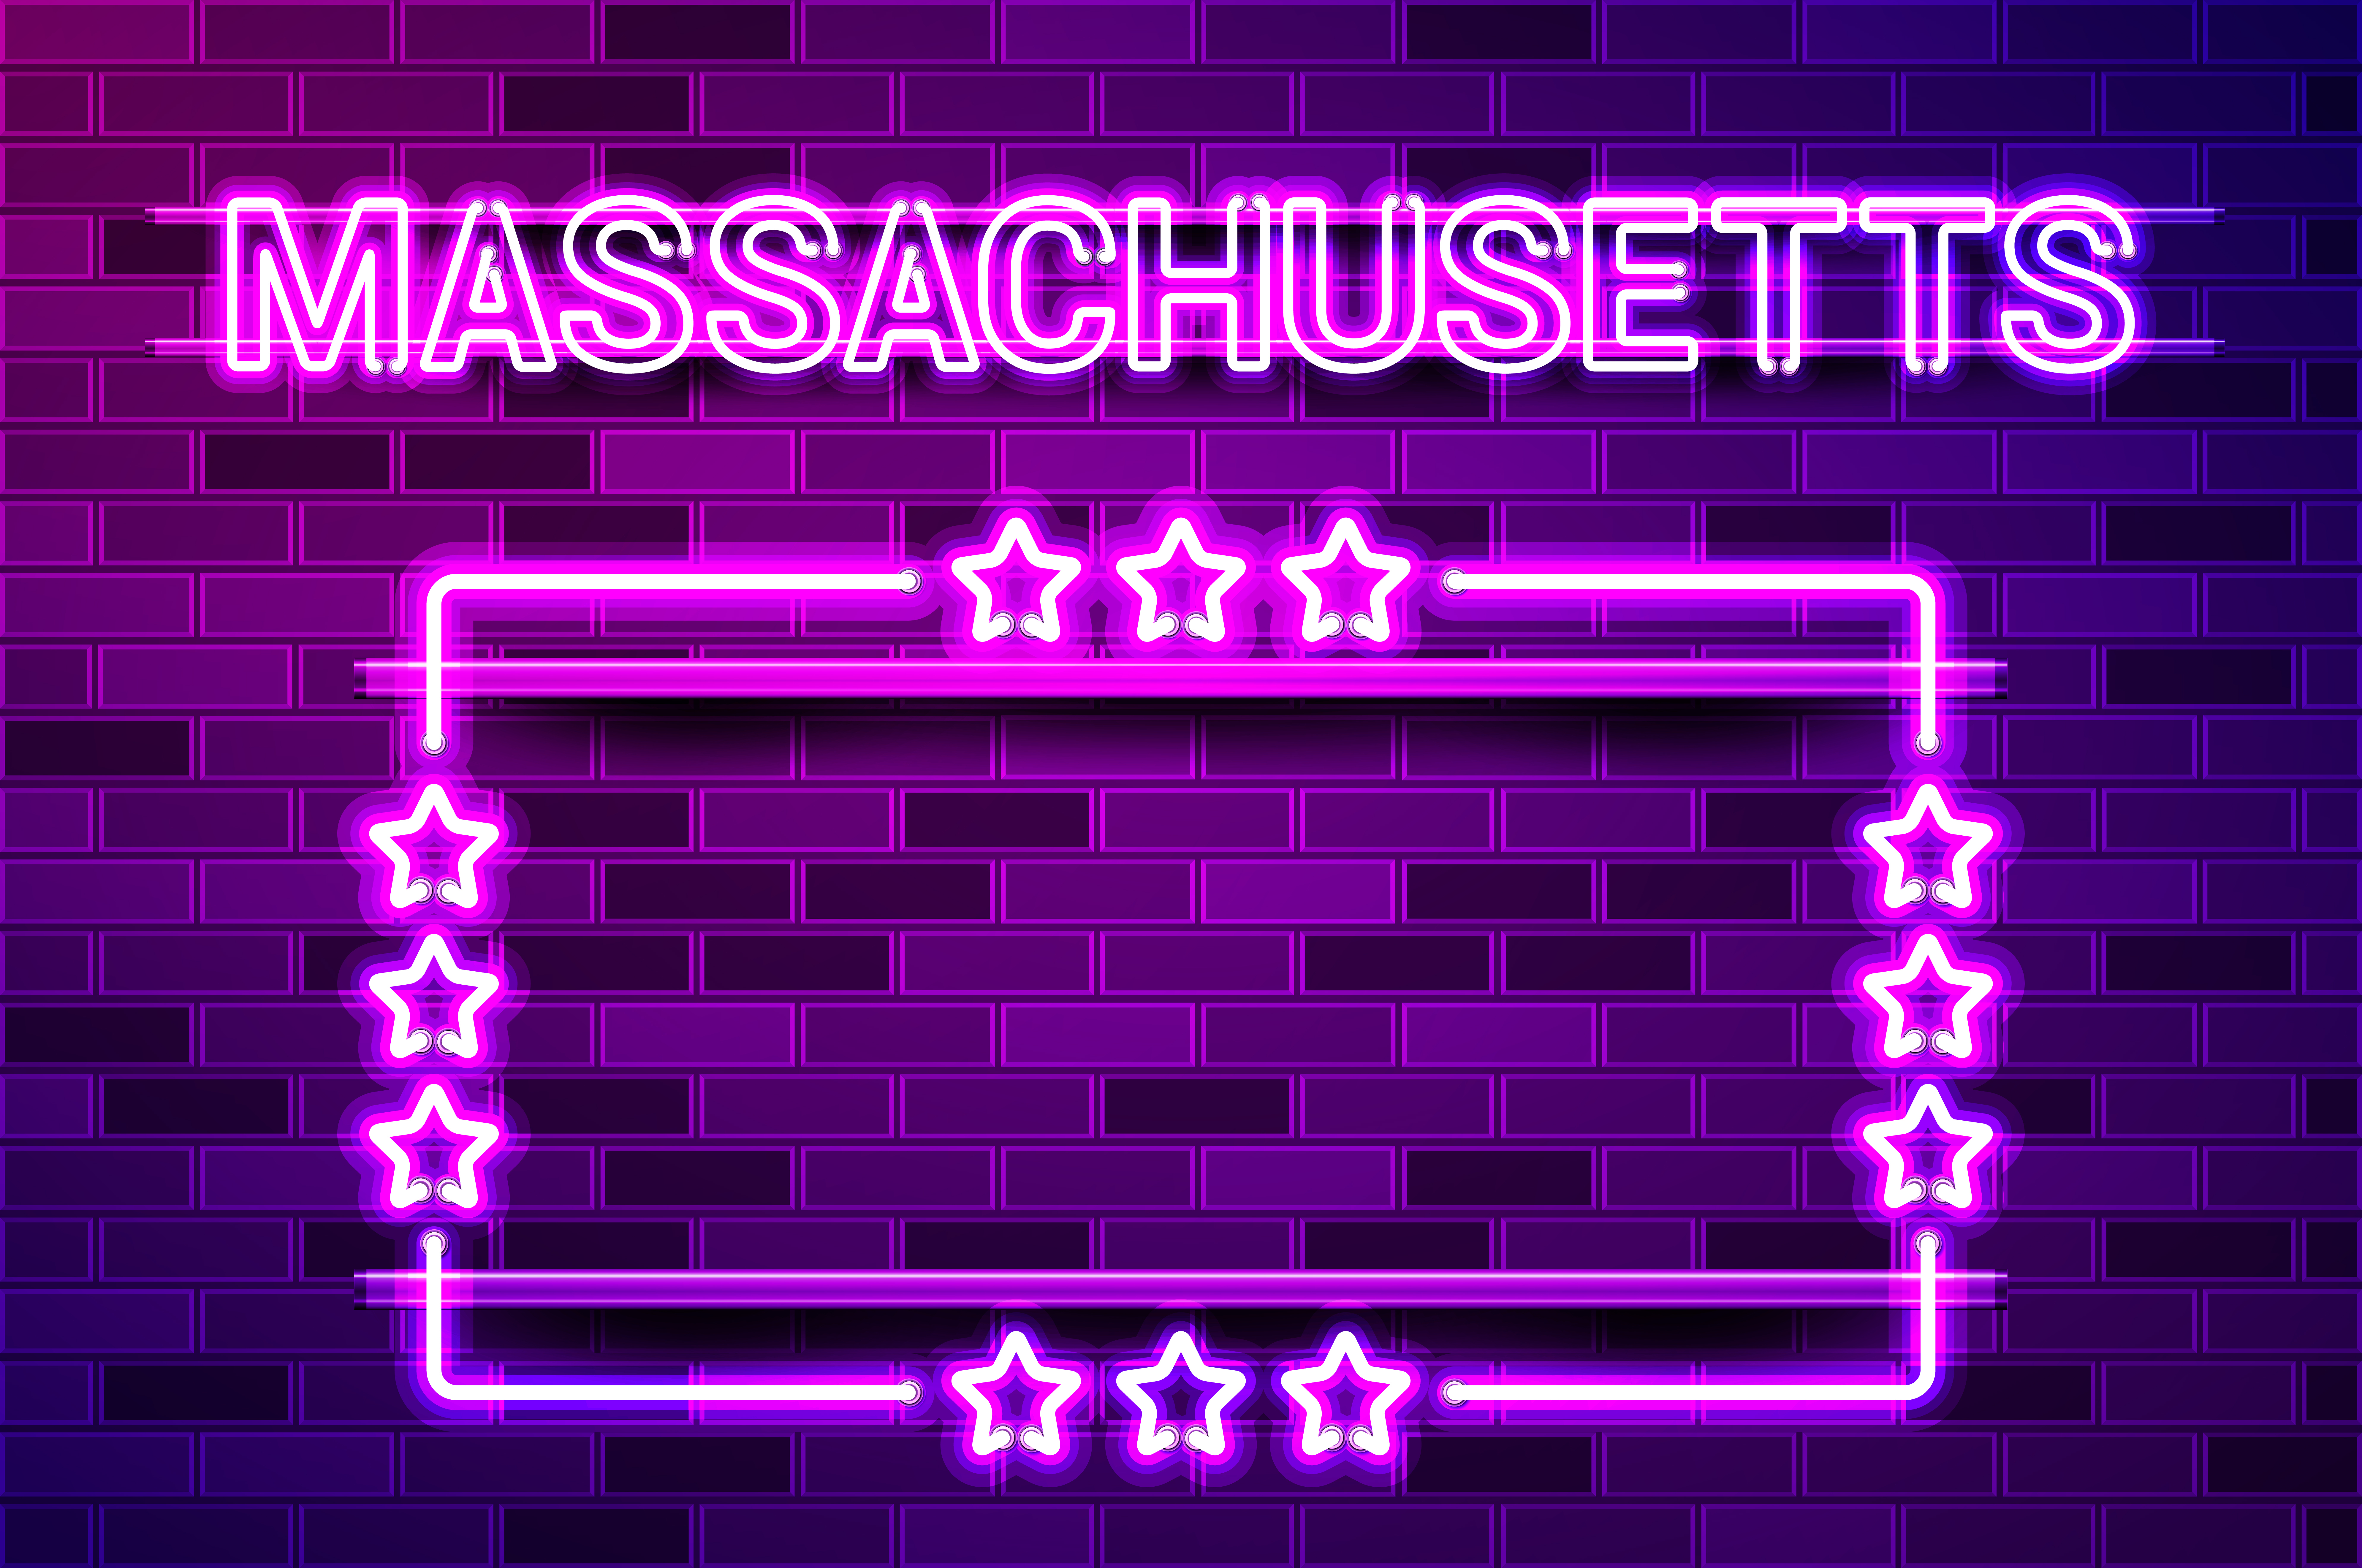 Massachusetts US State glowing purple neon lettering and a rectangular frame with stars. Realistic vector illustration. Purple brick wall, violet glow, metal holders.. Massachusetts US State glowing purple neon lettering and a rectangular frame with stars